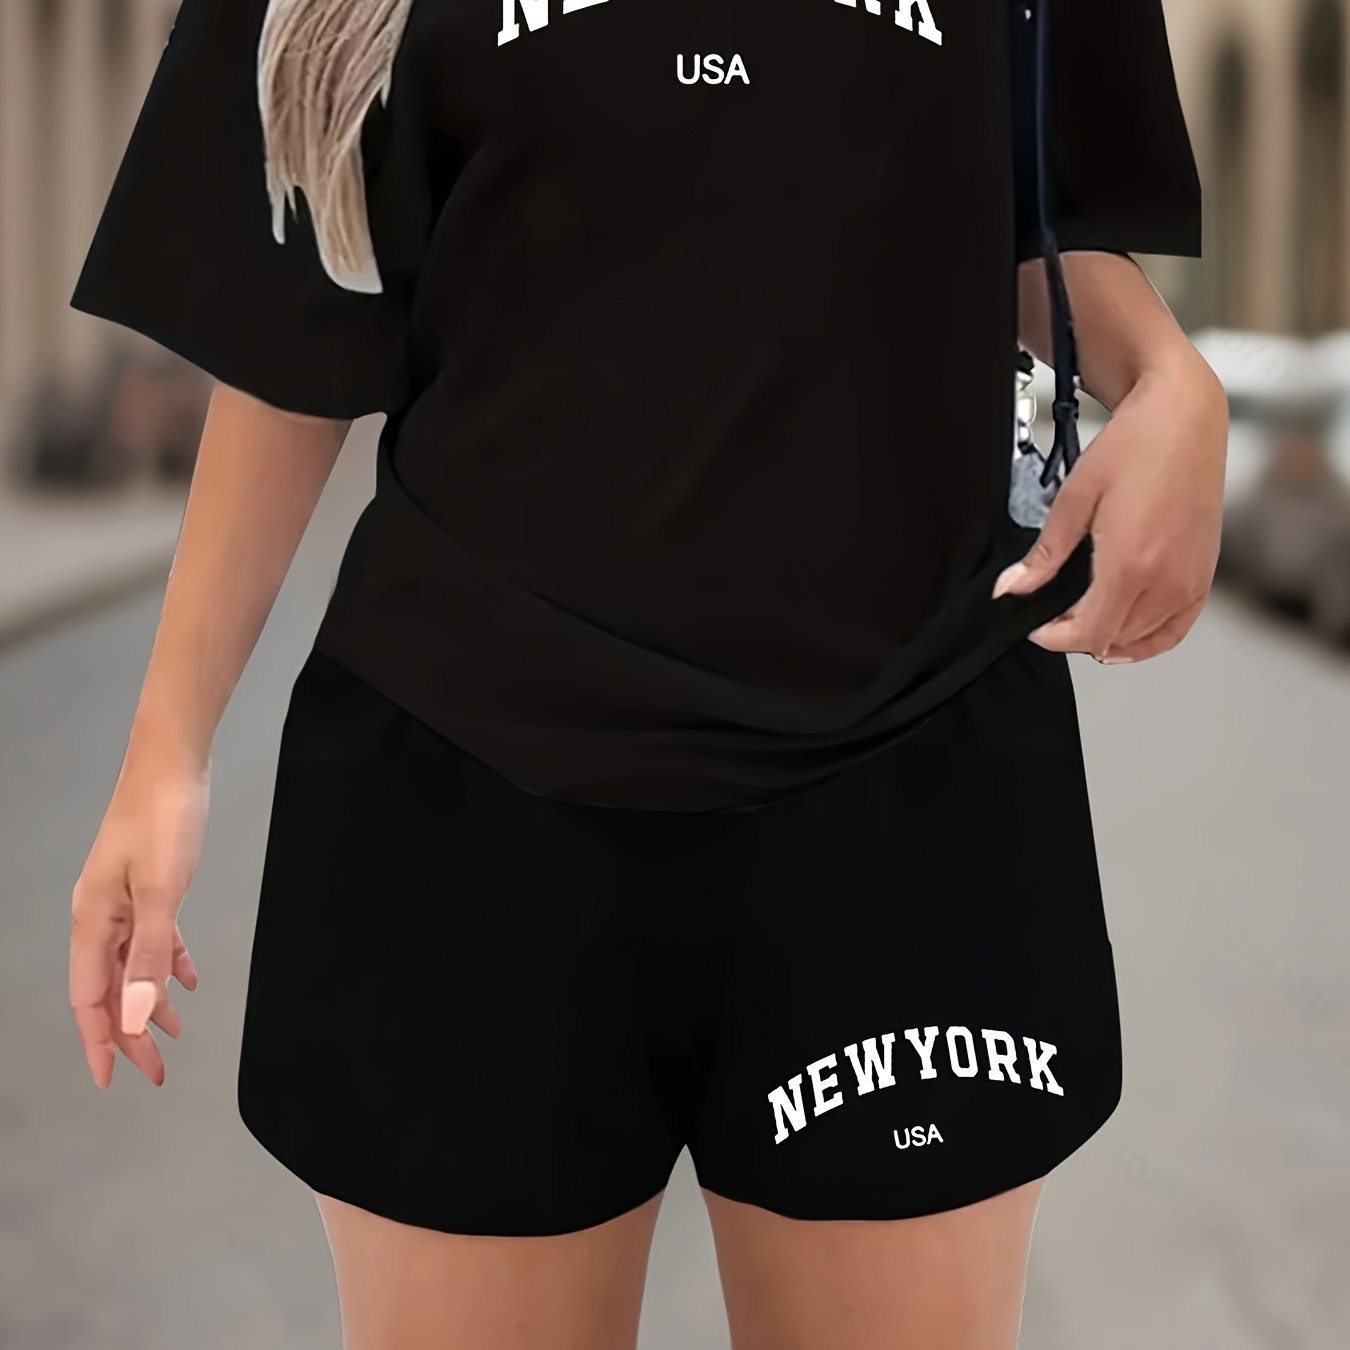 

Women's Casual Sports Set, Breathable Short Sleeve T-shirt & Quick-dry Shorts, Fashion New York Print, 2-piece Outfit